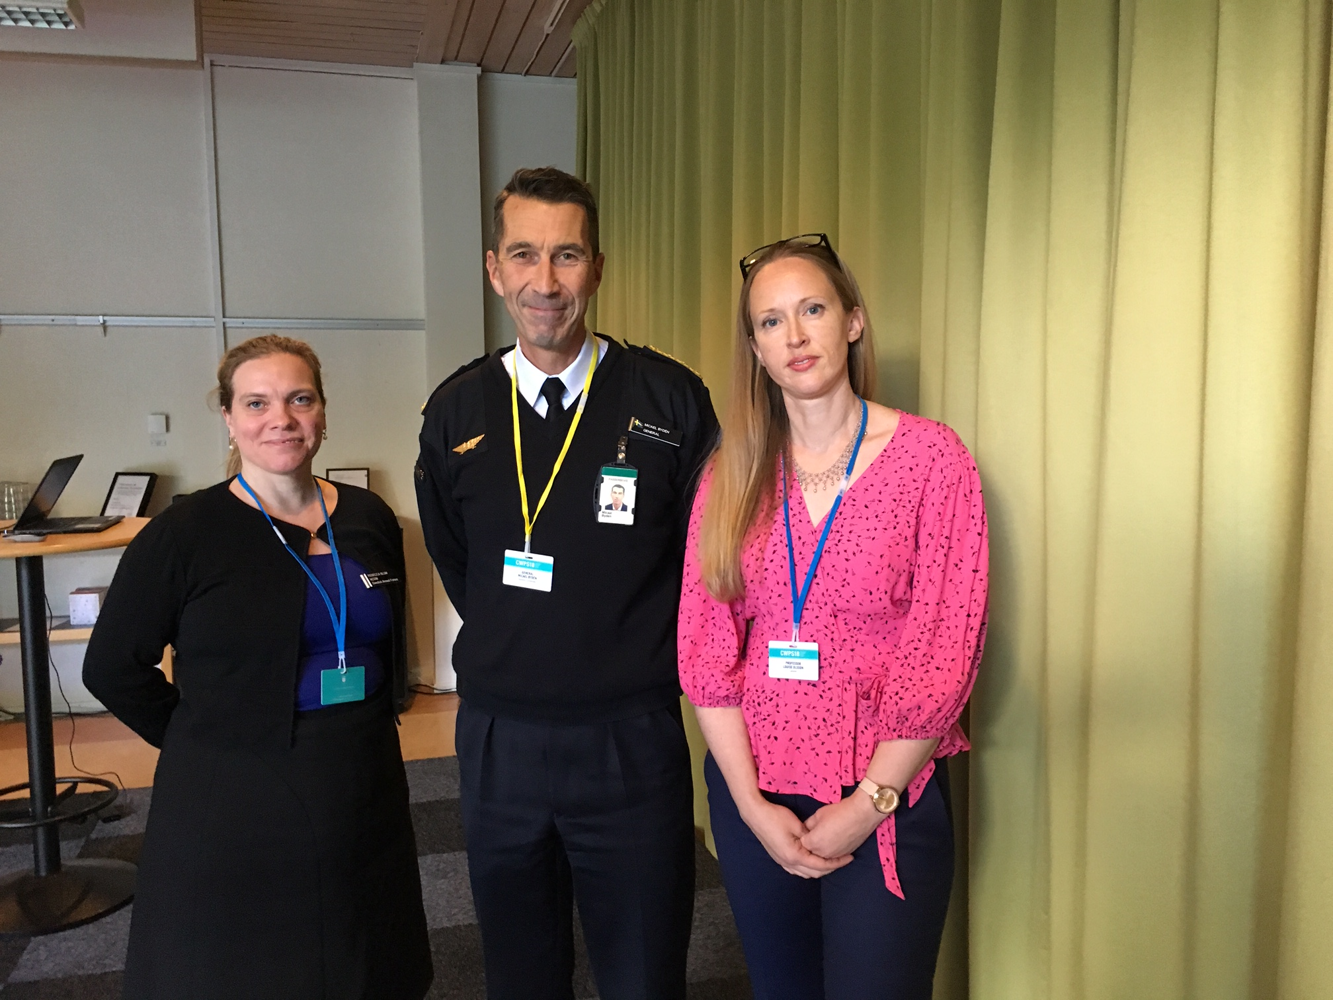 From left to right: Rebecca Blum (Nordic Centre for Gender in Military Operations), General Micael Bydén (Swedish Chief of Defence), Louise Olsson (PRIO Senior Researcher). Photo: Louise Olsson